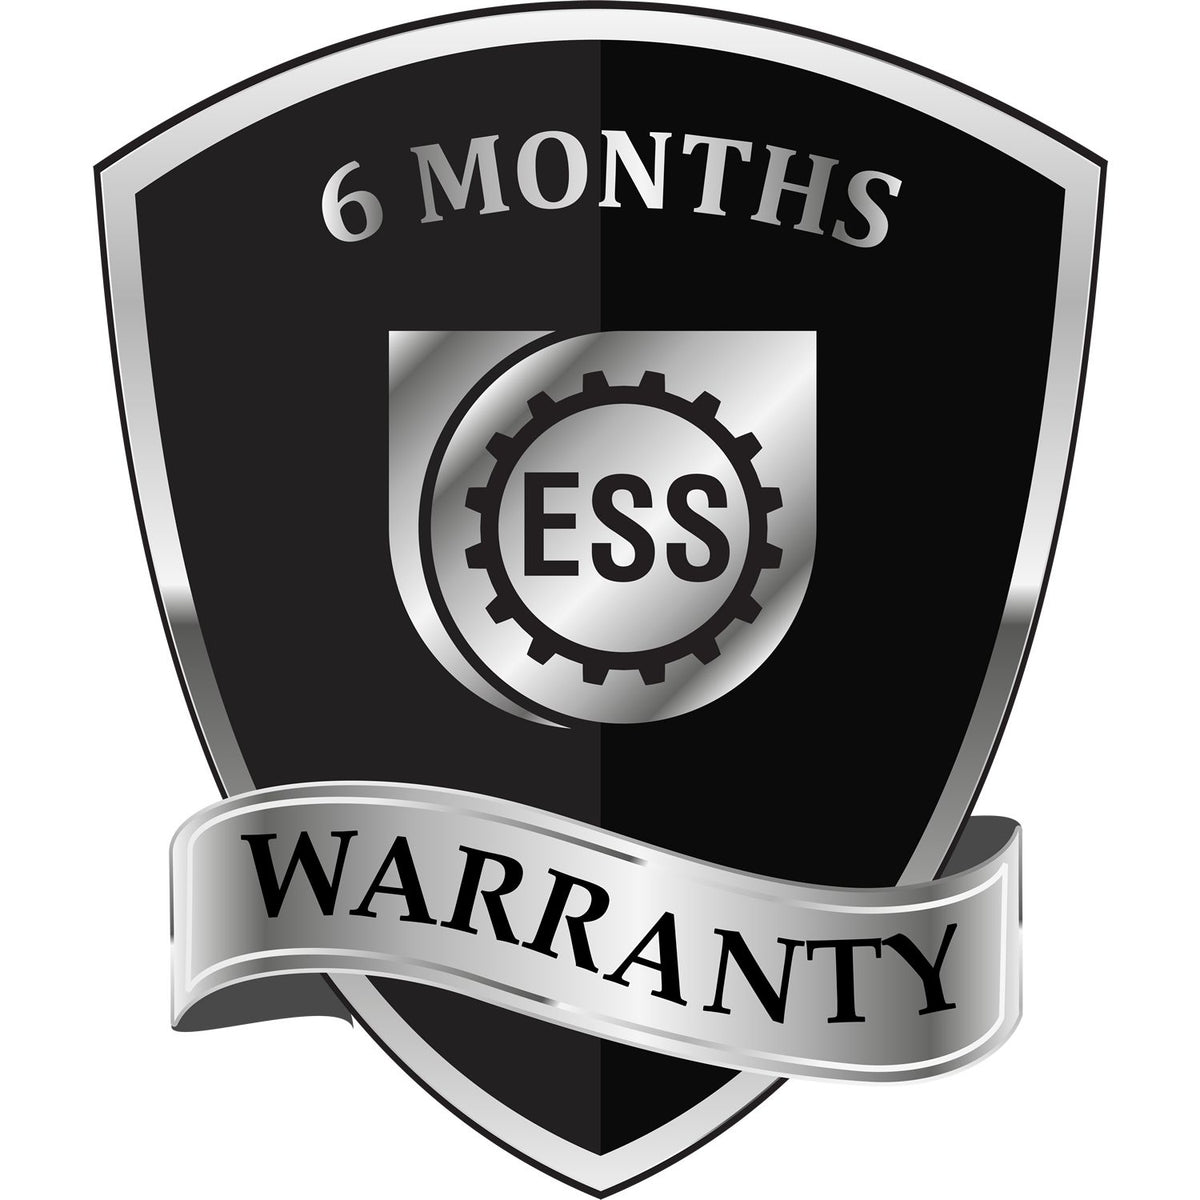 A black and silver badge or emblem showing warranty information for the Utah Professional Geologist Seal Stamp